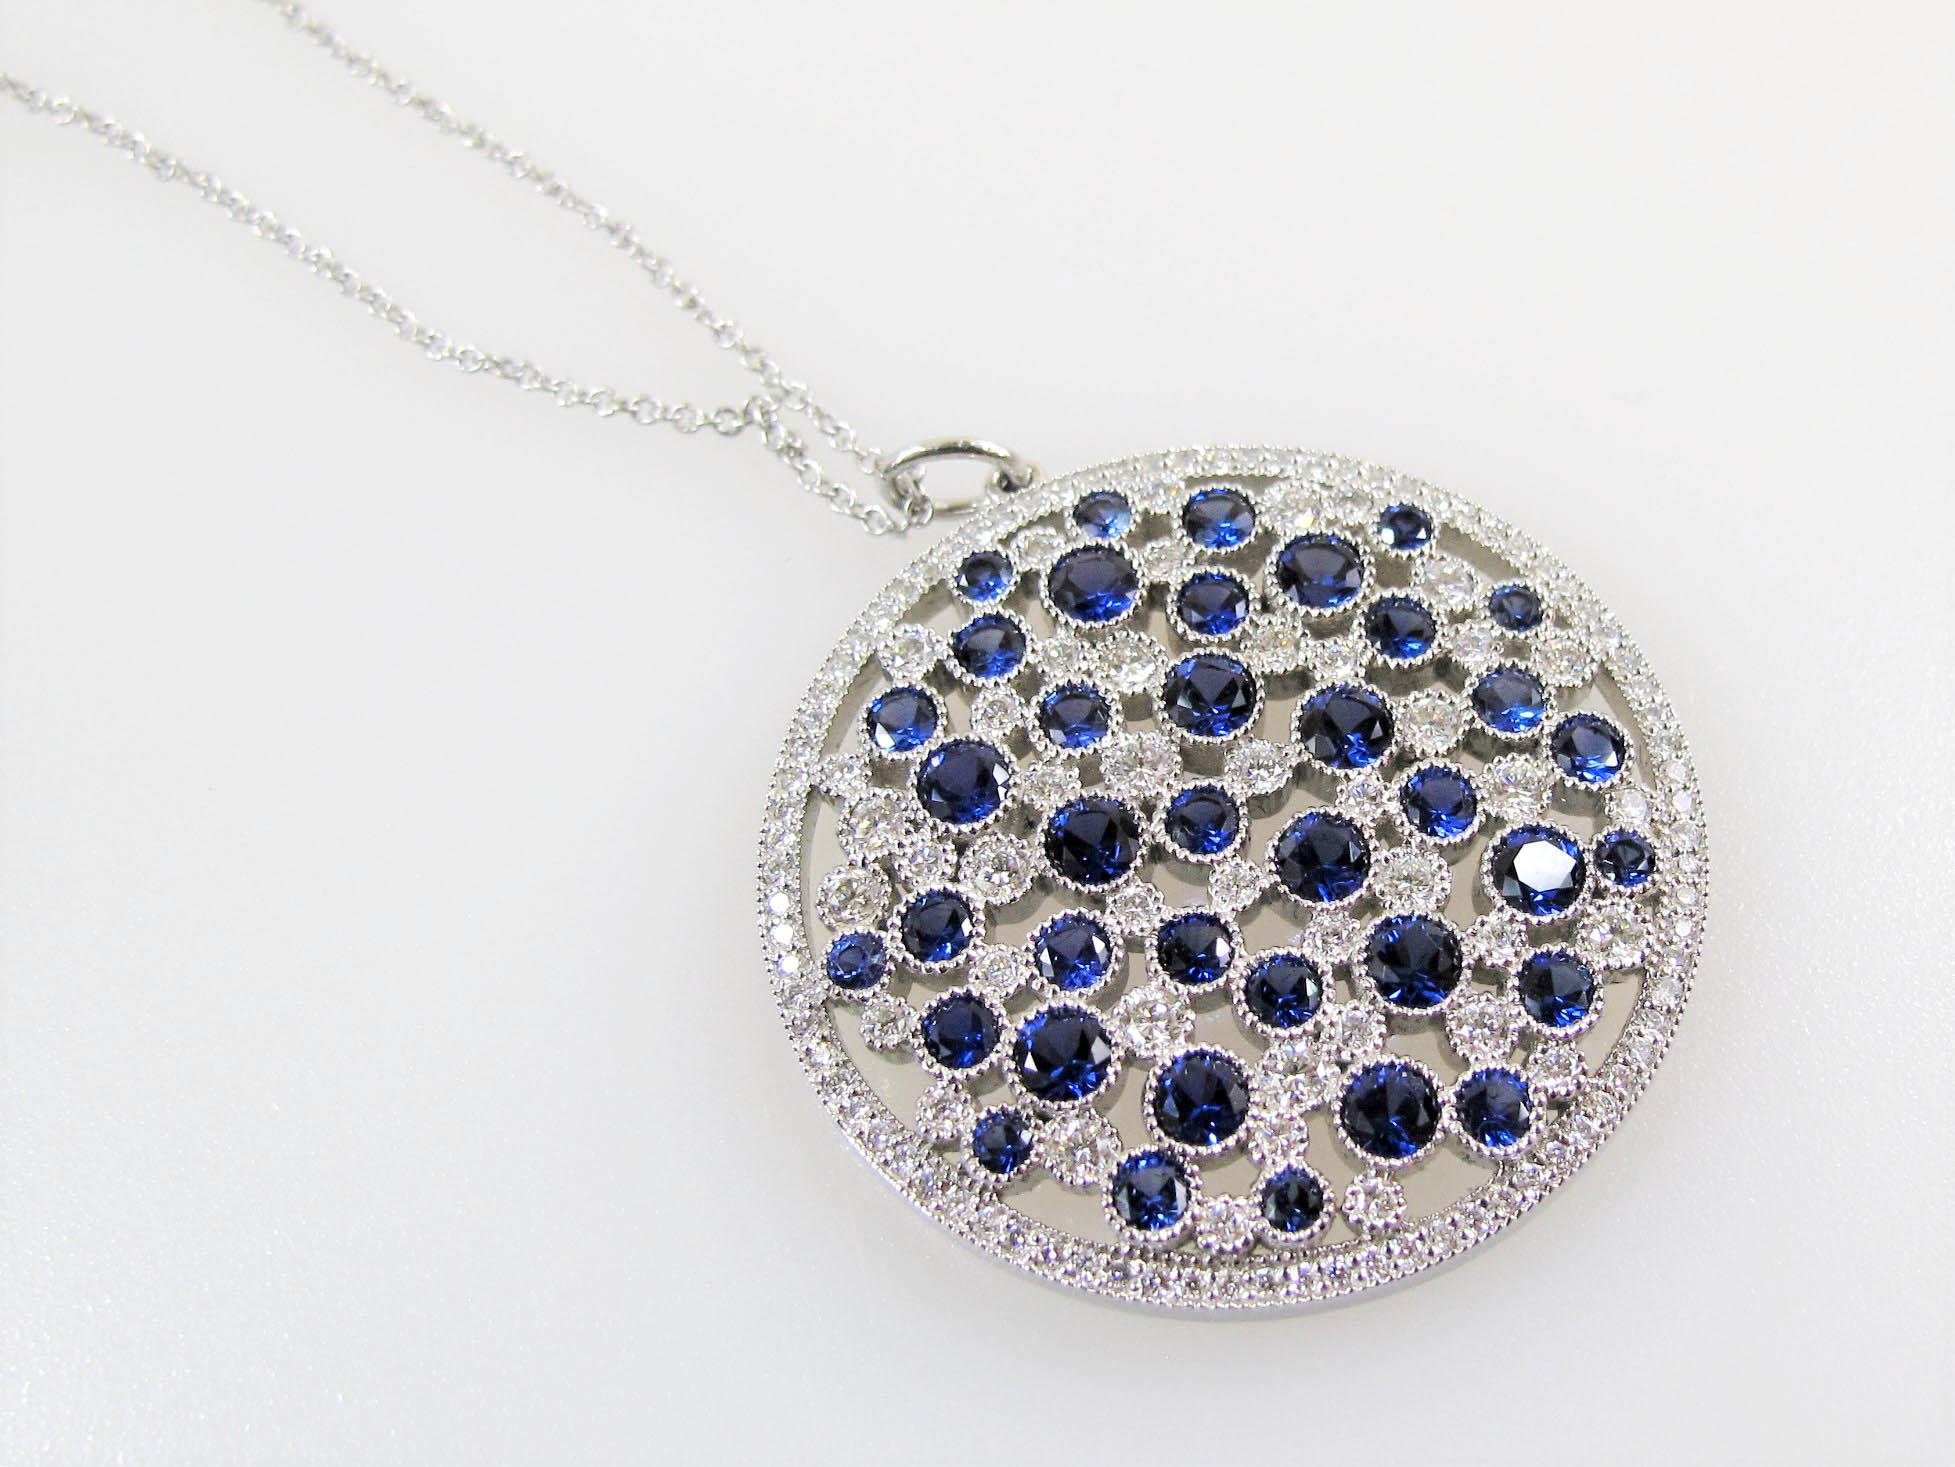 This is an absolutely stunning, brightly colored Cobblestone medallion necklace by renowned jewelry retailer, Tiffany & Co. Featuring luxurious sapphire gemstones paired with incredible, icy white diamonds, this pendant is bursting with playful